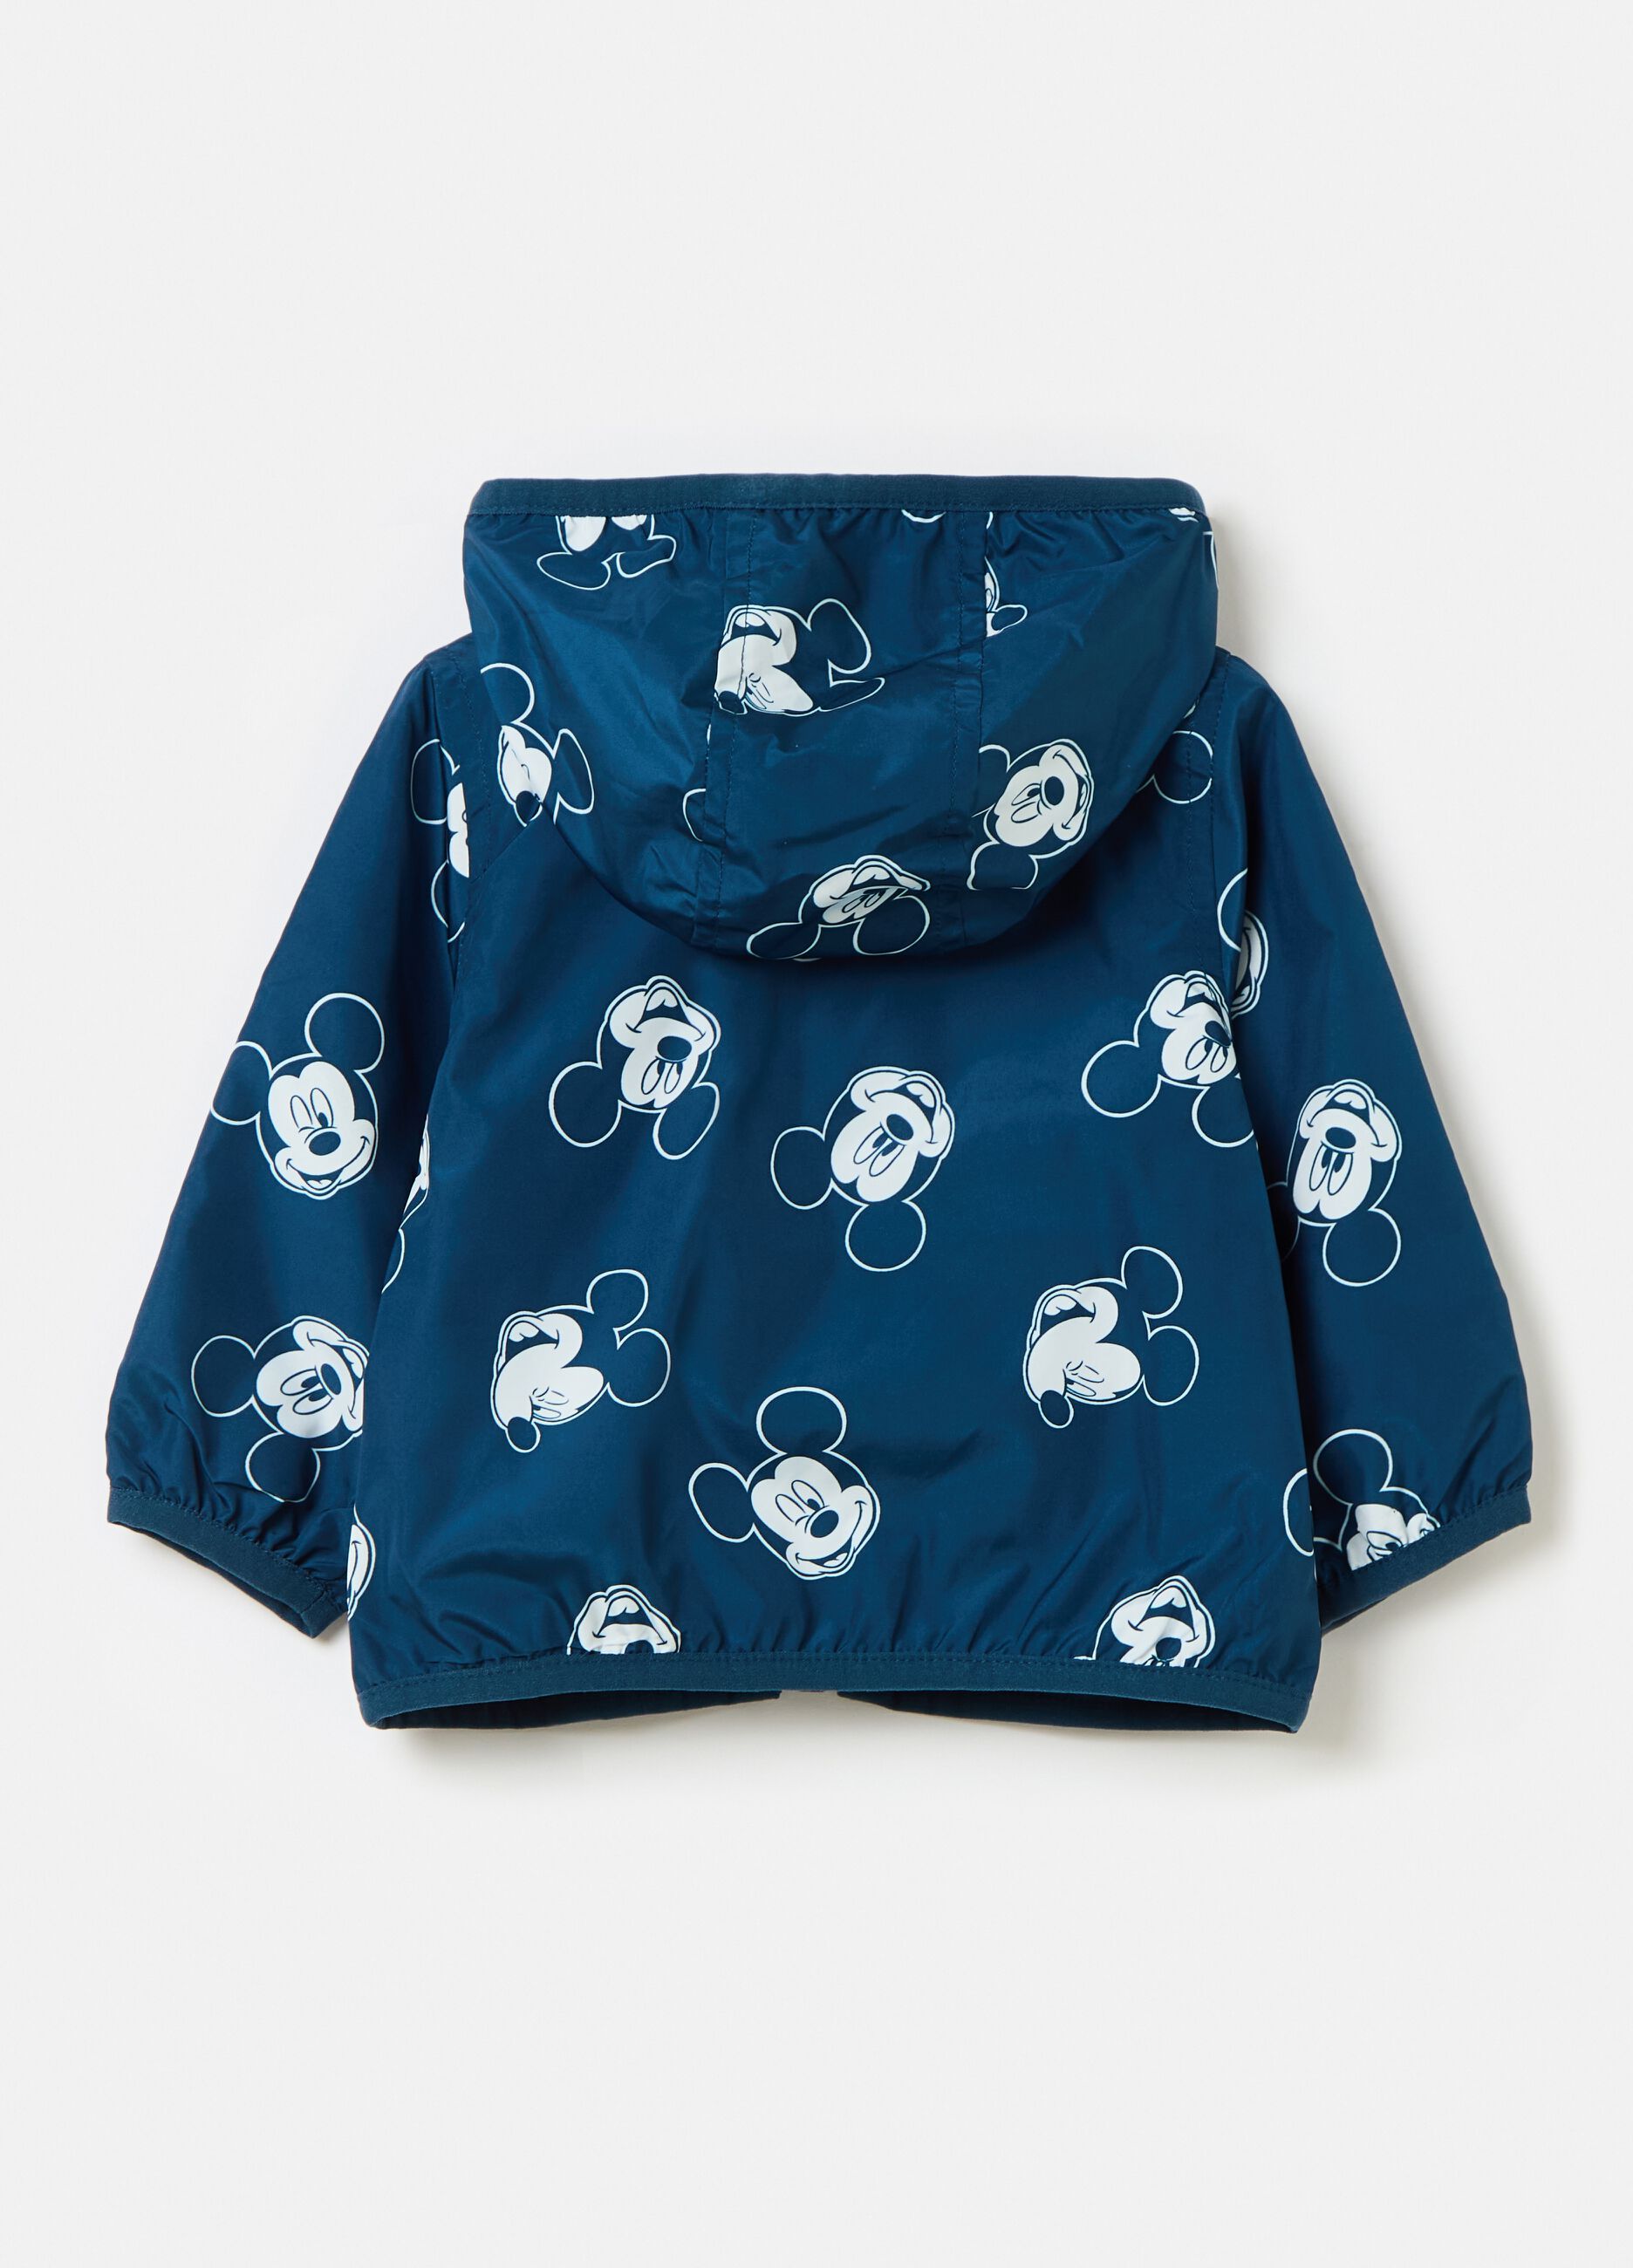 Waterproof jacket with Mickey Mouse print